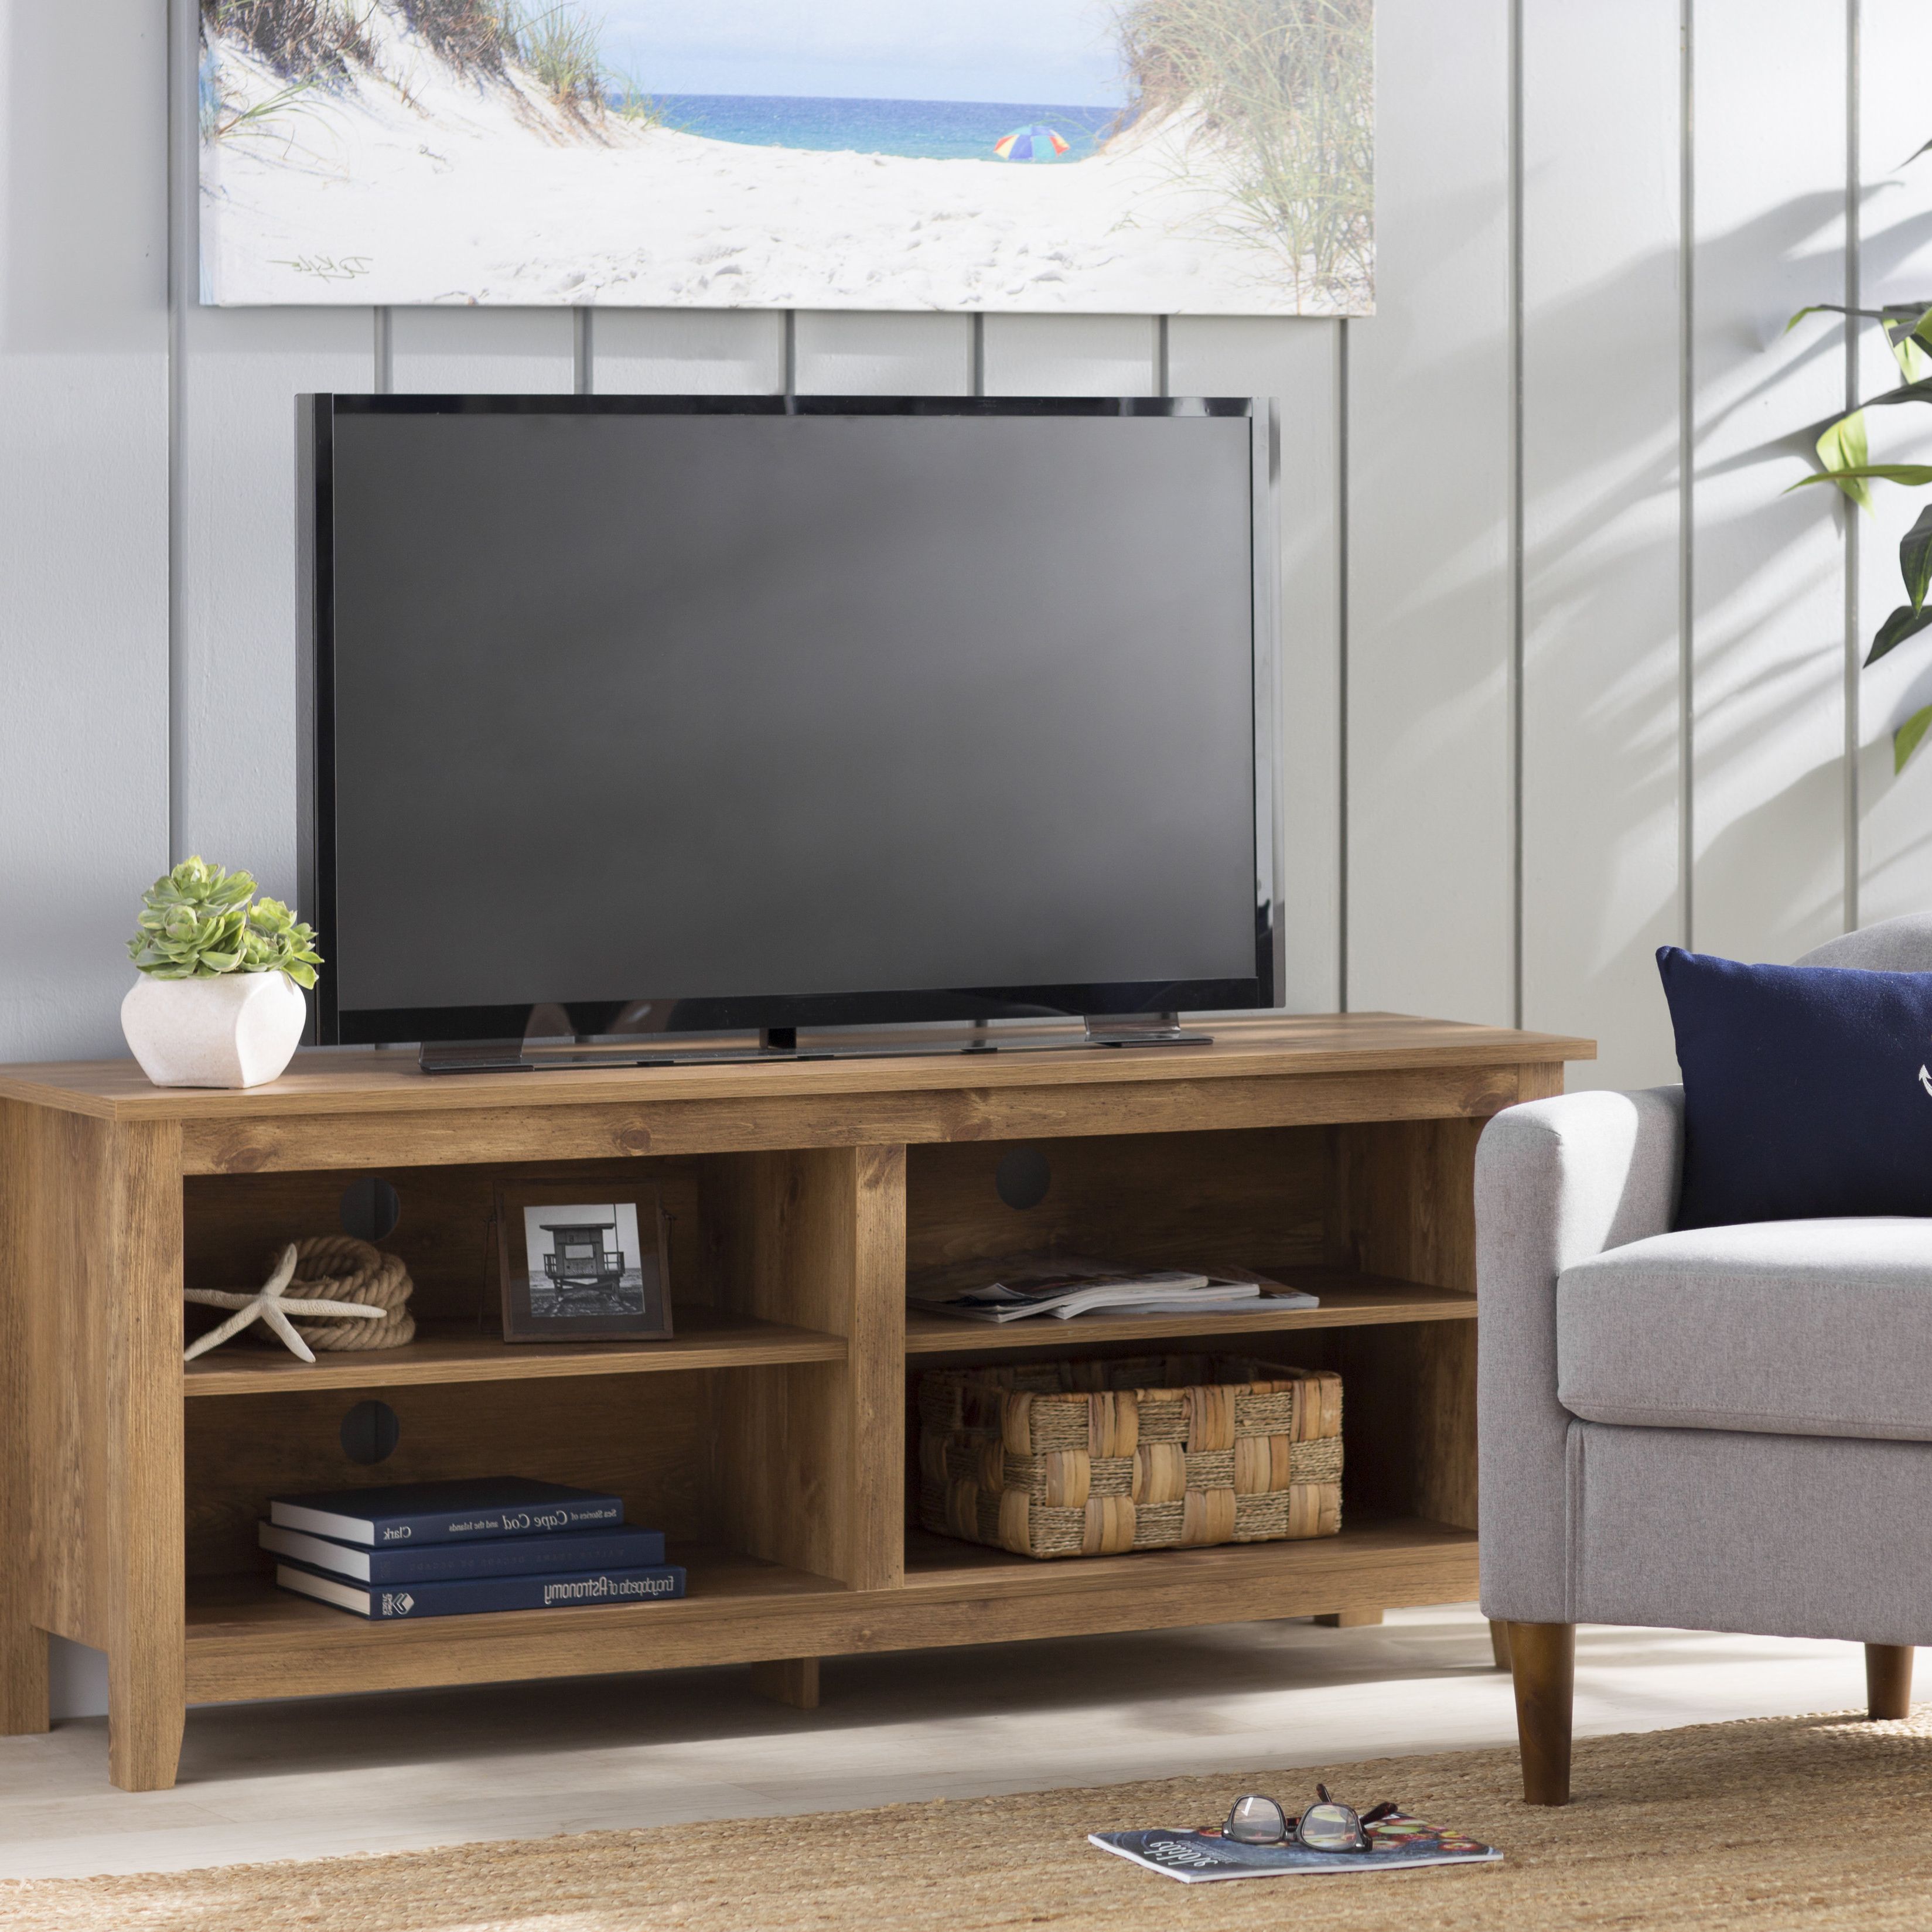 Popular Ducar 74 Inch Tv Stands Regarding Tv Stands & Entertainment Centers You'll Love (View 14 of 20)